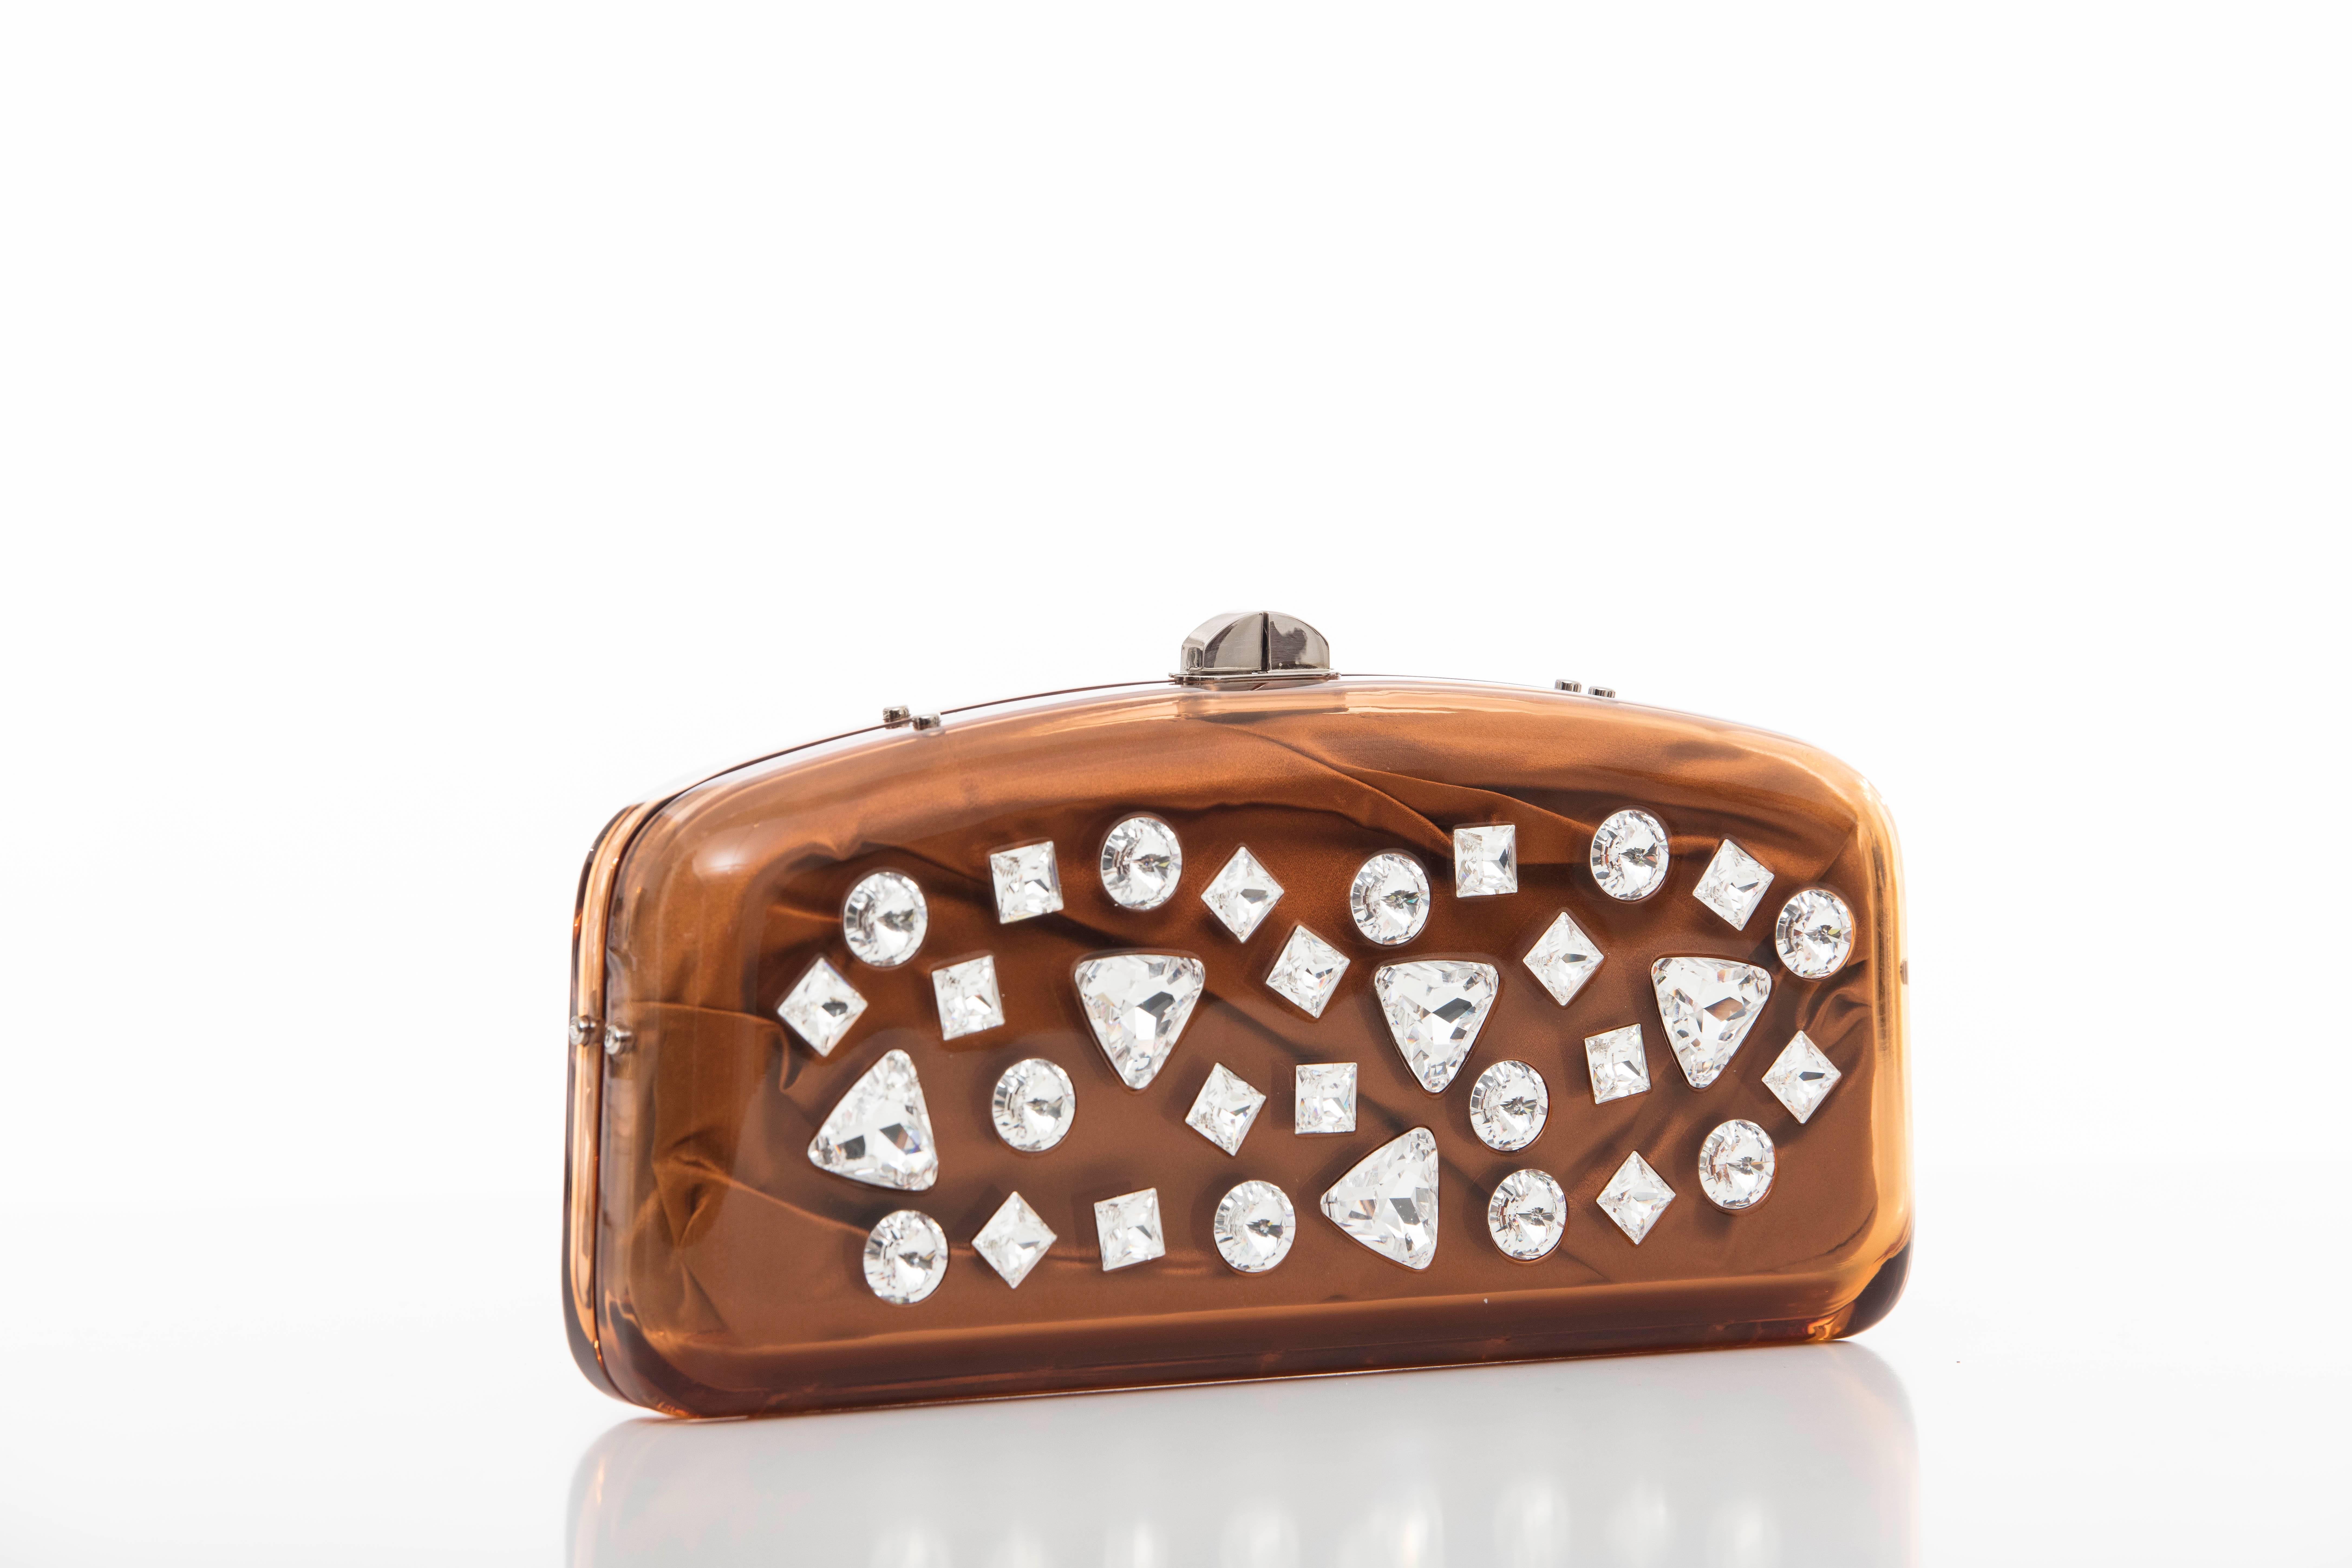 Tom Ford for Yves Saint Laurent, Autumn-Winter 2003 runway copper lucite crystal clutch with silver tone hardware, kiss lock closure and tonal satin lining.

Height: 5, Width 10, Depth 1.5

